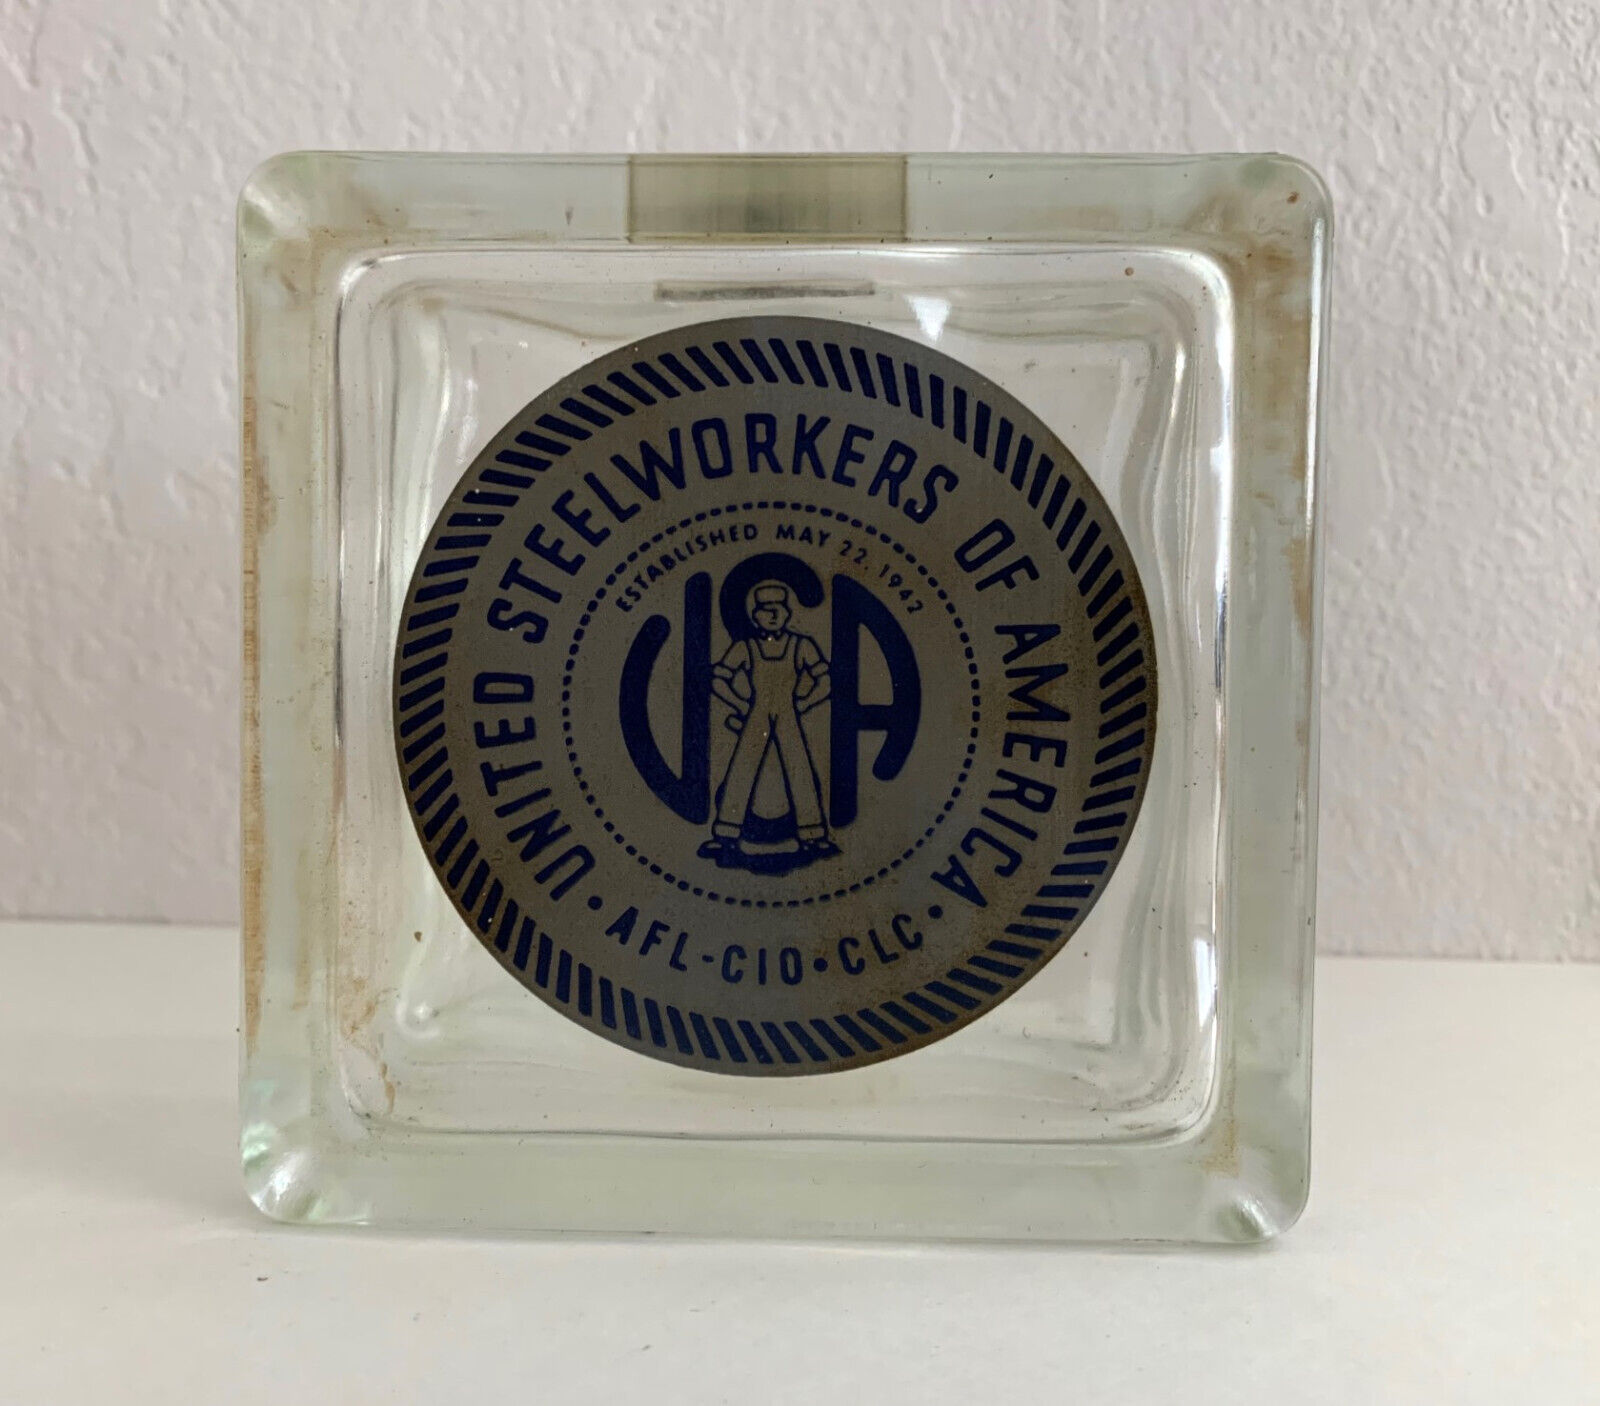 Vintage Steelworkers Union Collectible Glass Bank